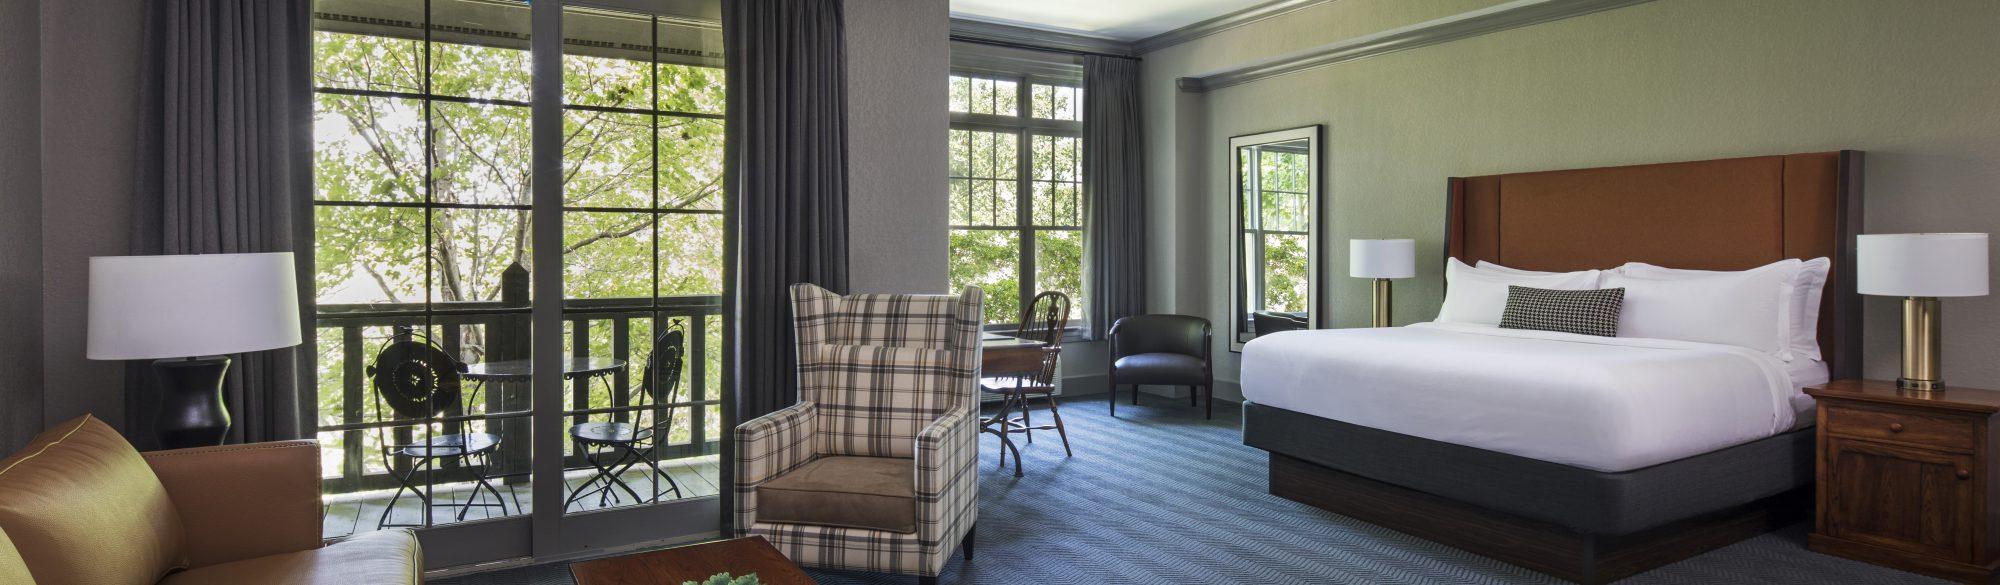 The Lodge at Ballantyne King Guestroom